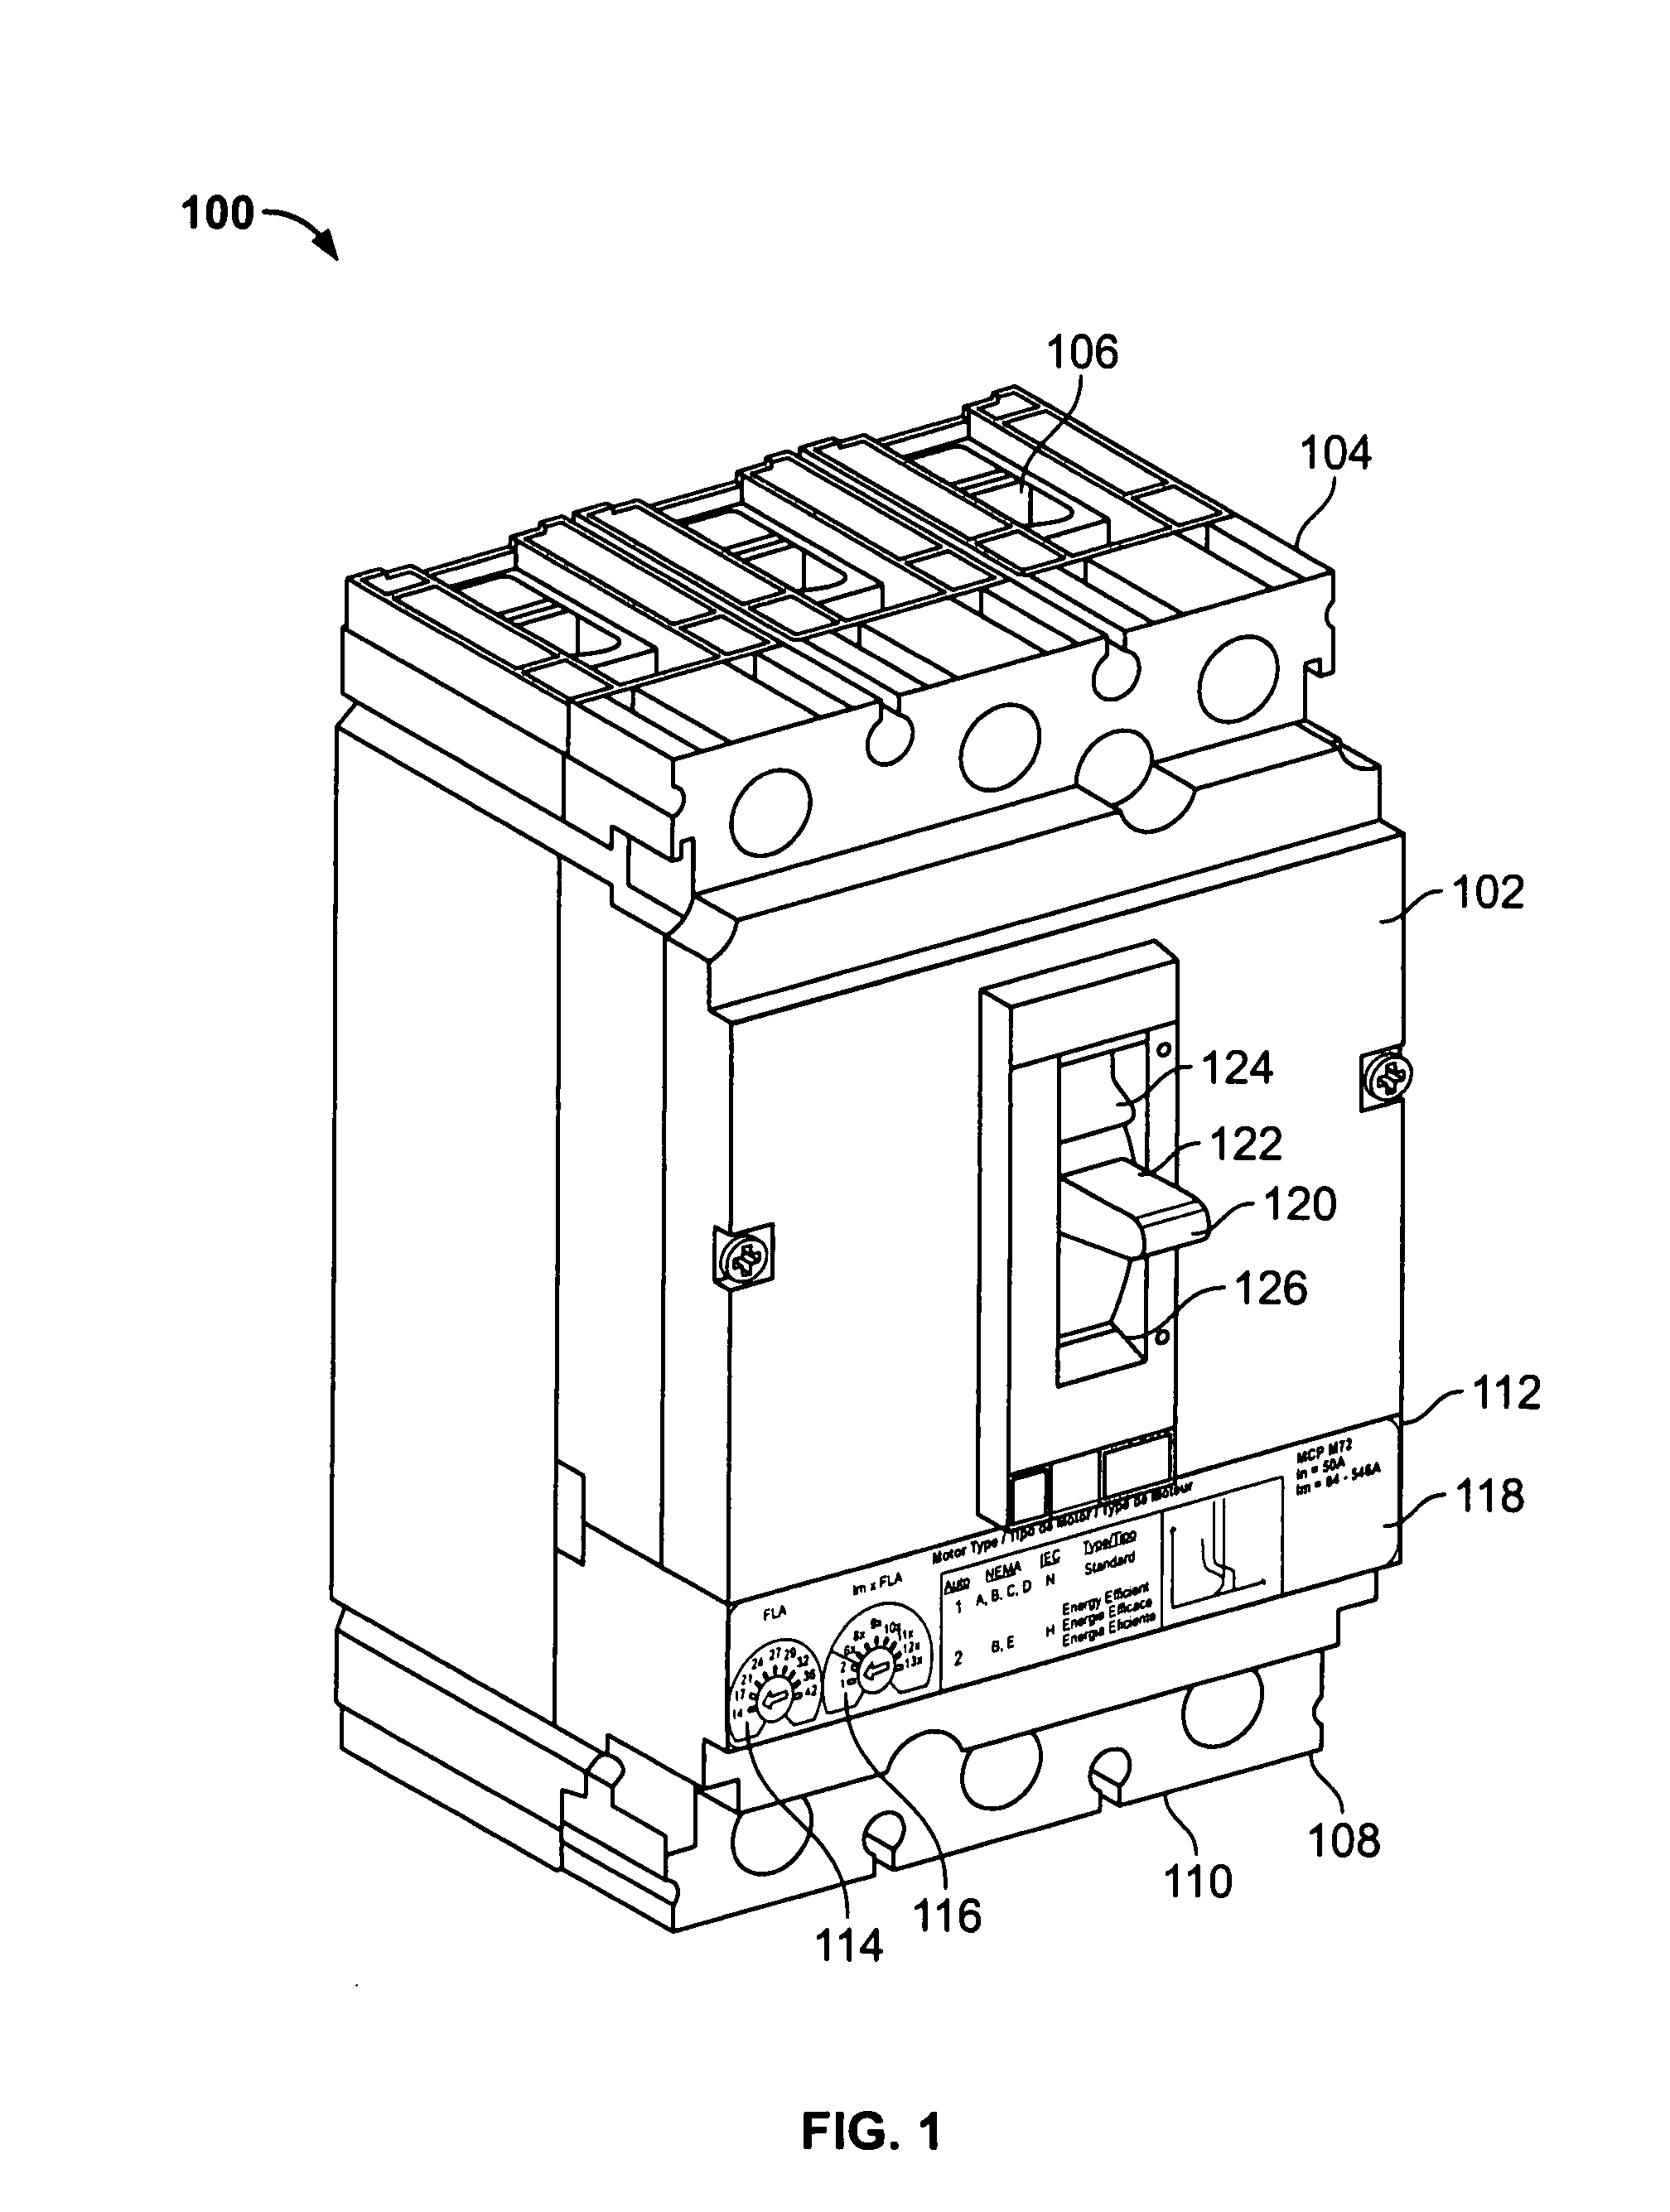 Method and system of calibrating sensing components in a circuit breaker system